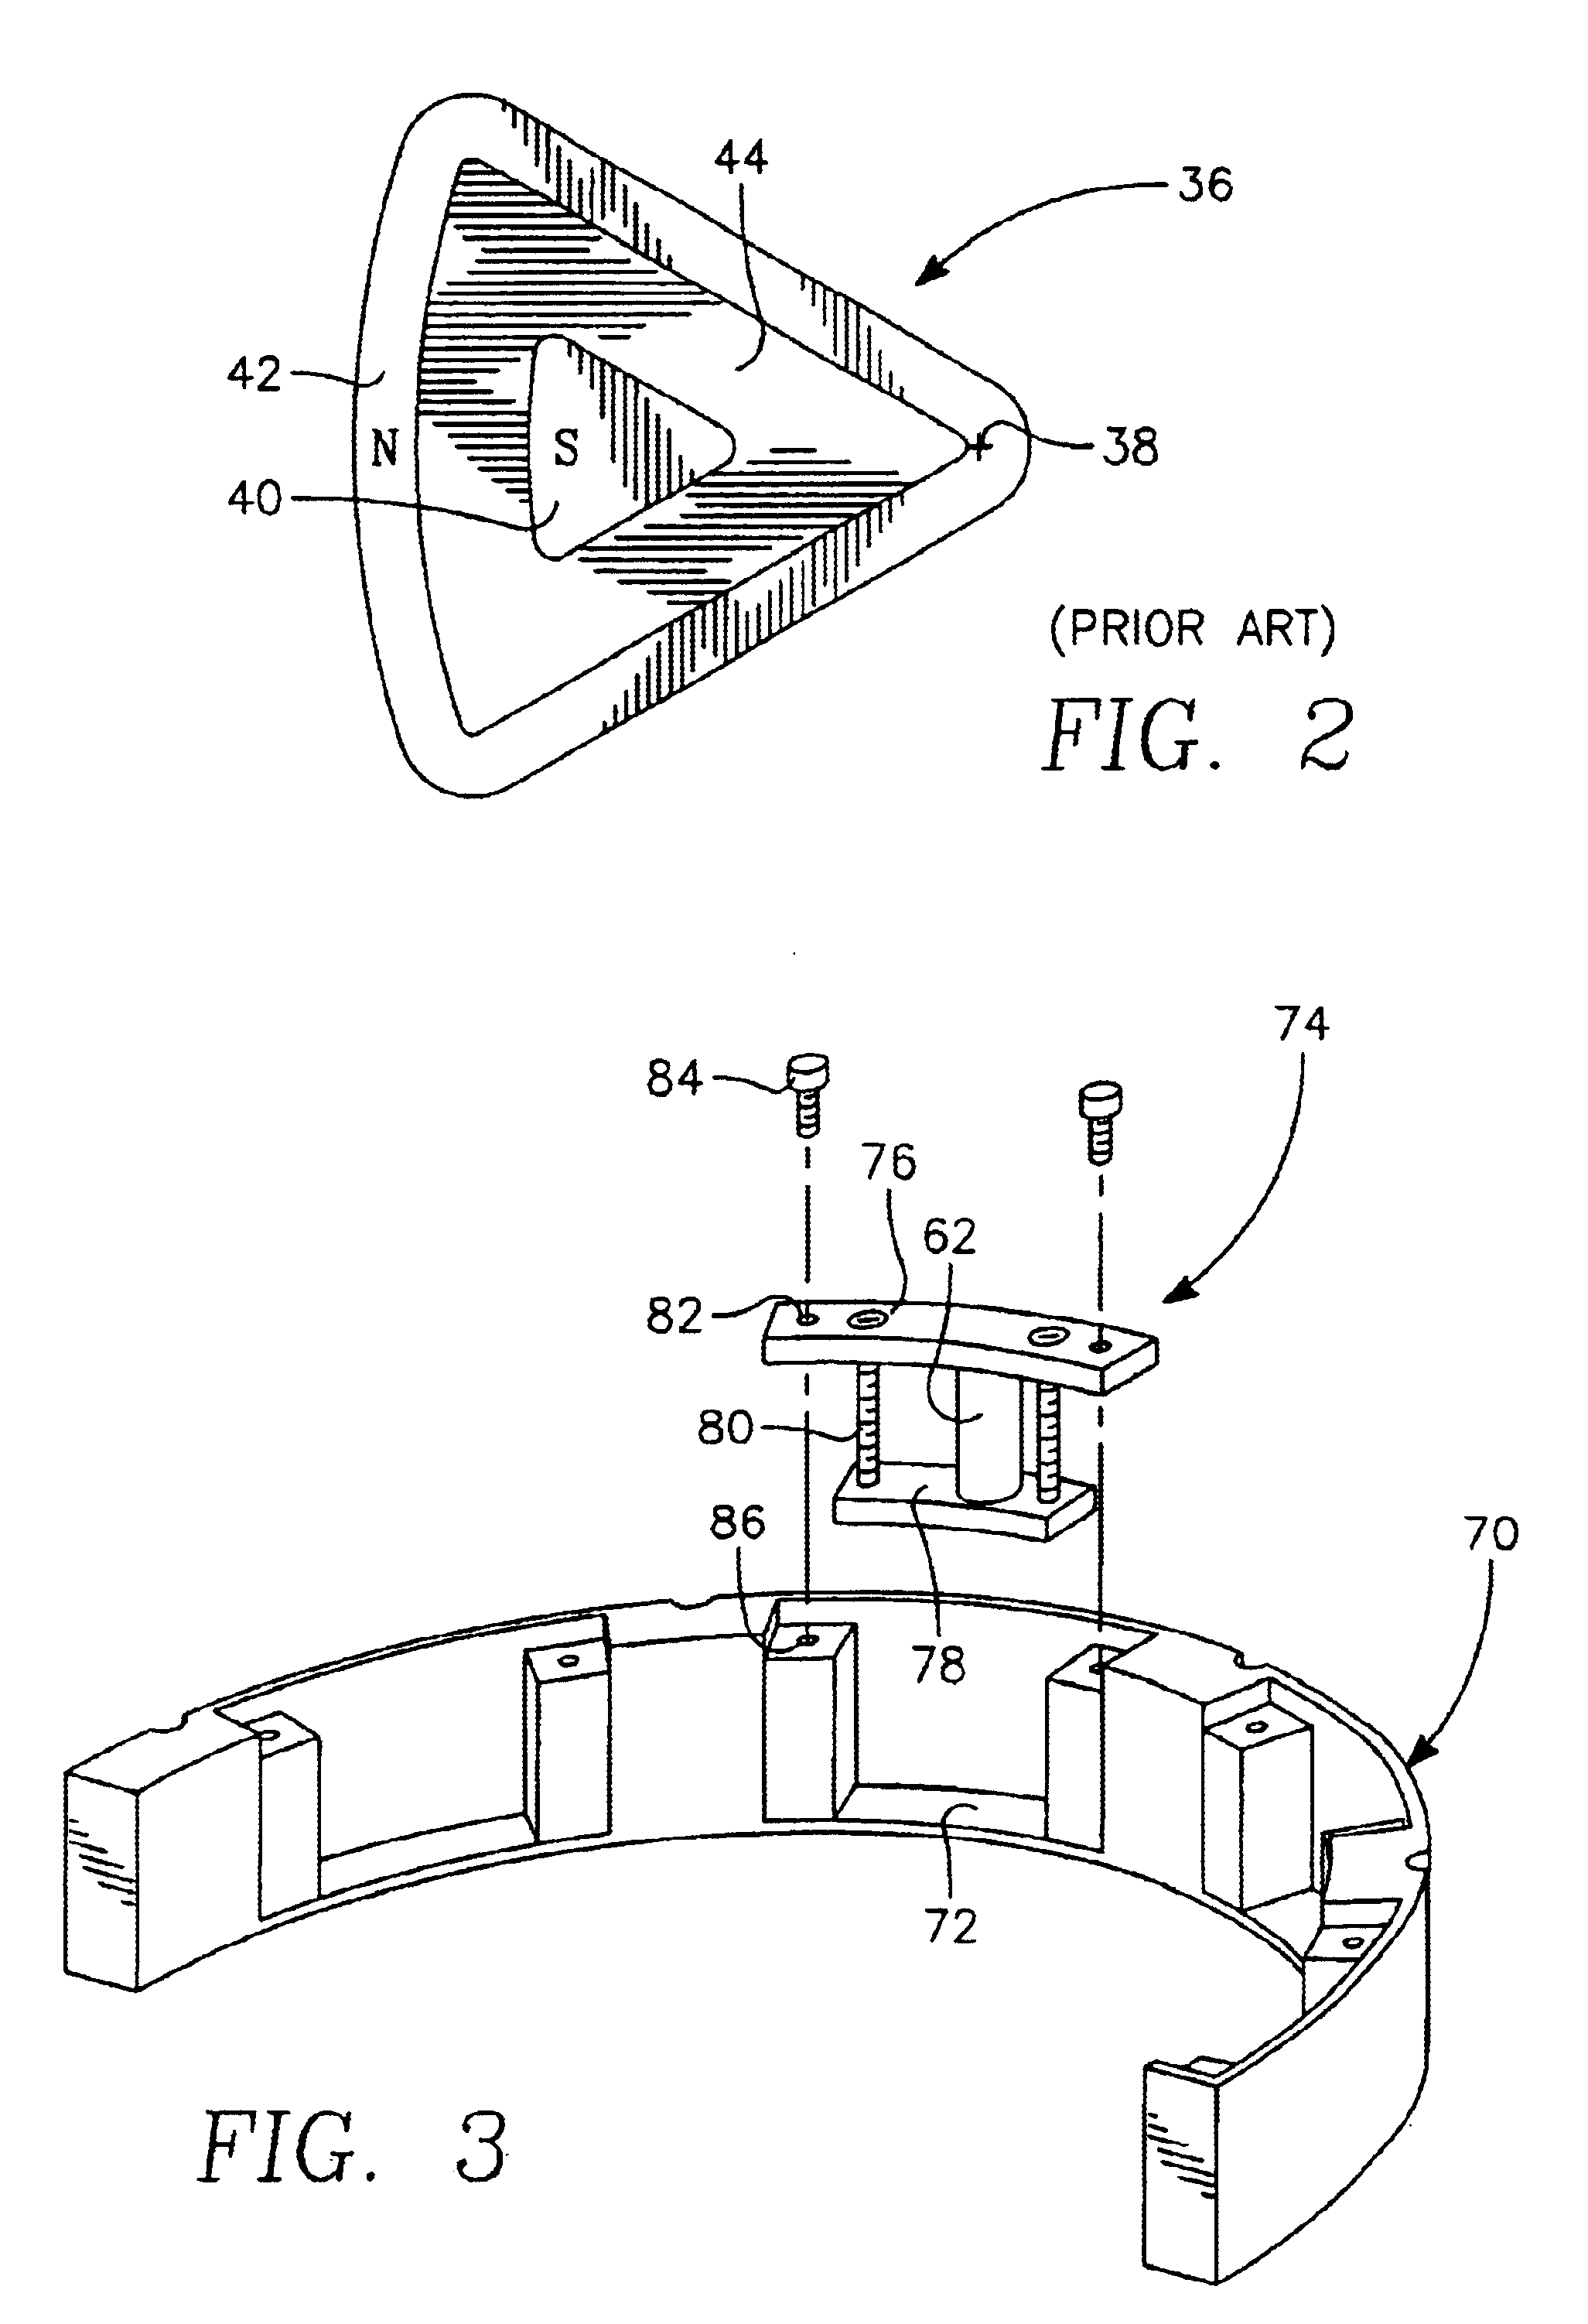 Auxiliary magnet array in conjunction with magnetron sputtering